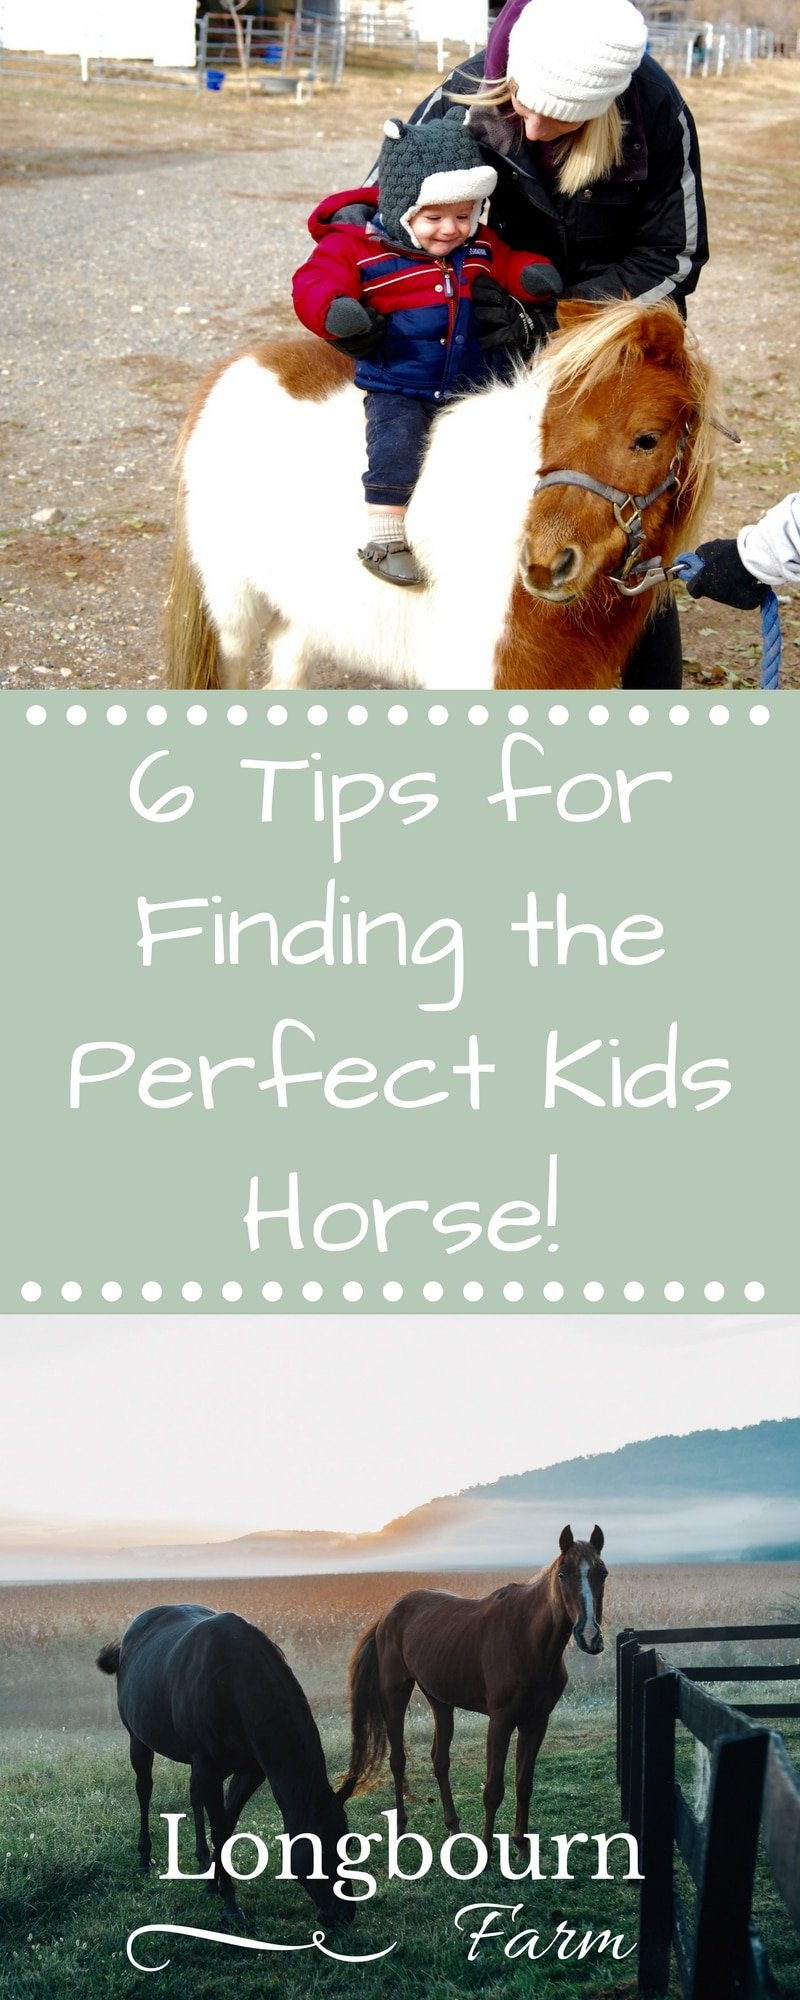 Finding the perfect kids horse can be a challenge, but here are 6 tips to help you on your search for the right mount for your family!